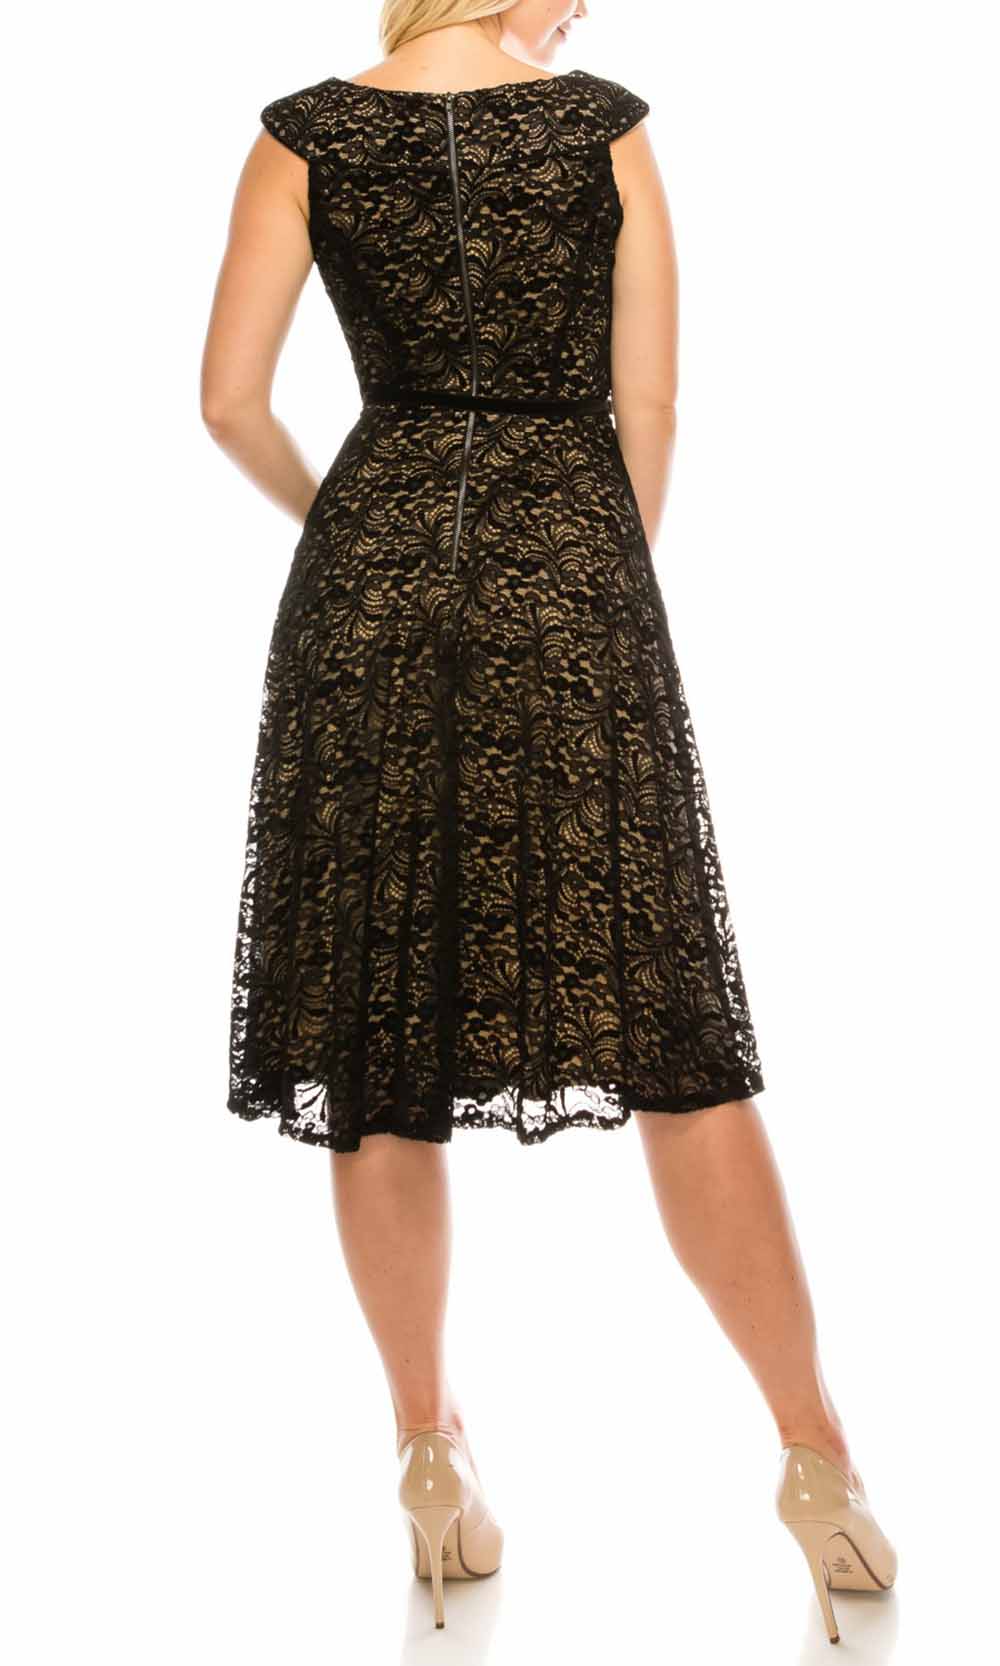 Maison Tara - 95183M Cap Sleeve Velveted Lace A-Line Dress In Black and Neutral